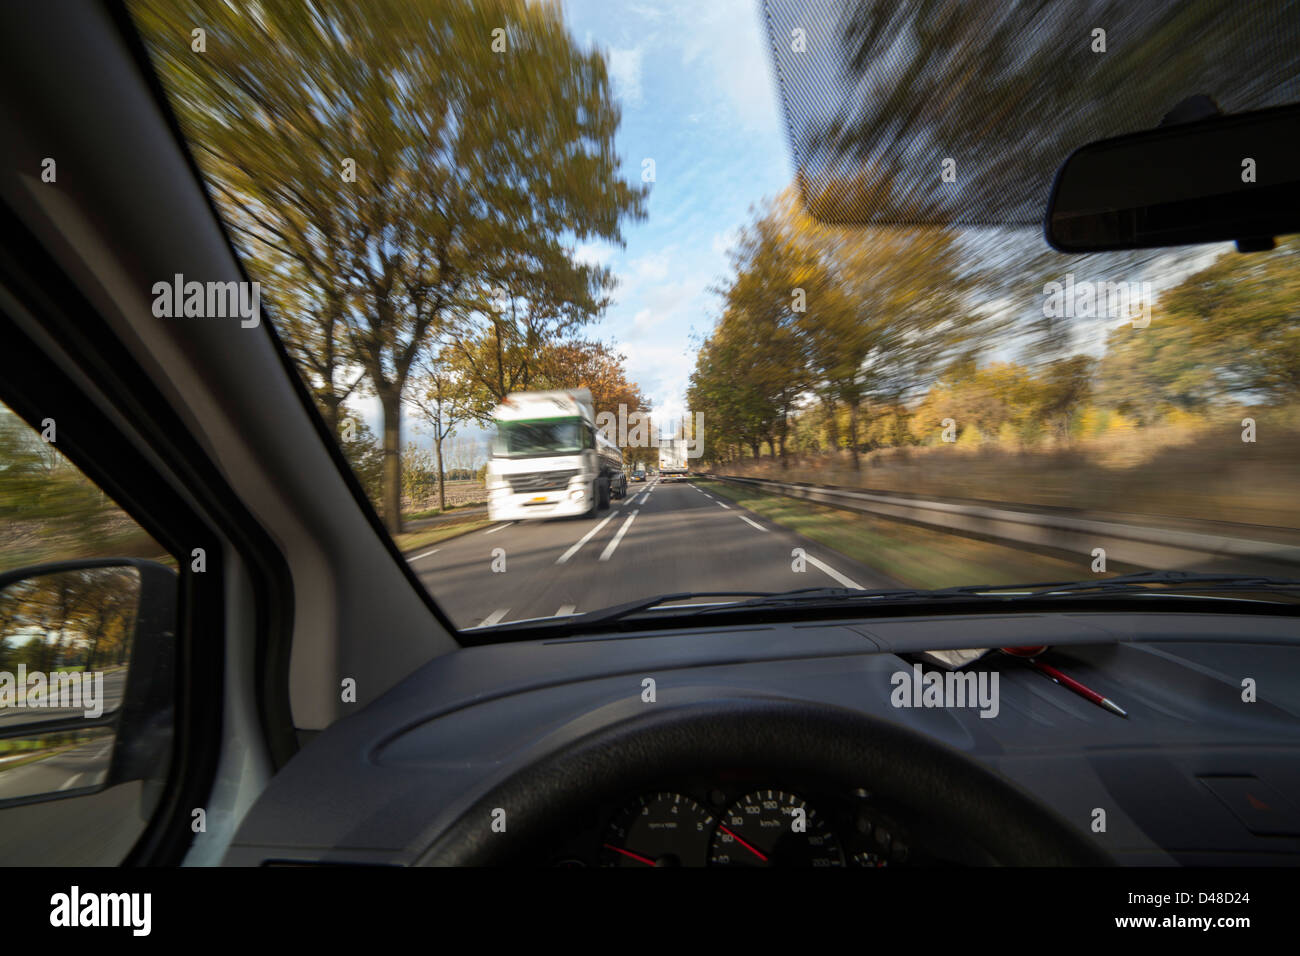 upcoming traffic from a car diver's point of view with a fast driving truck coming up Stock Photo